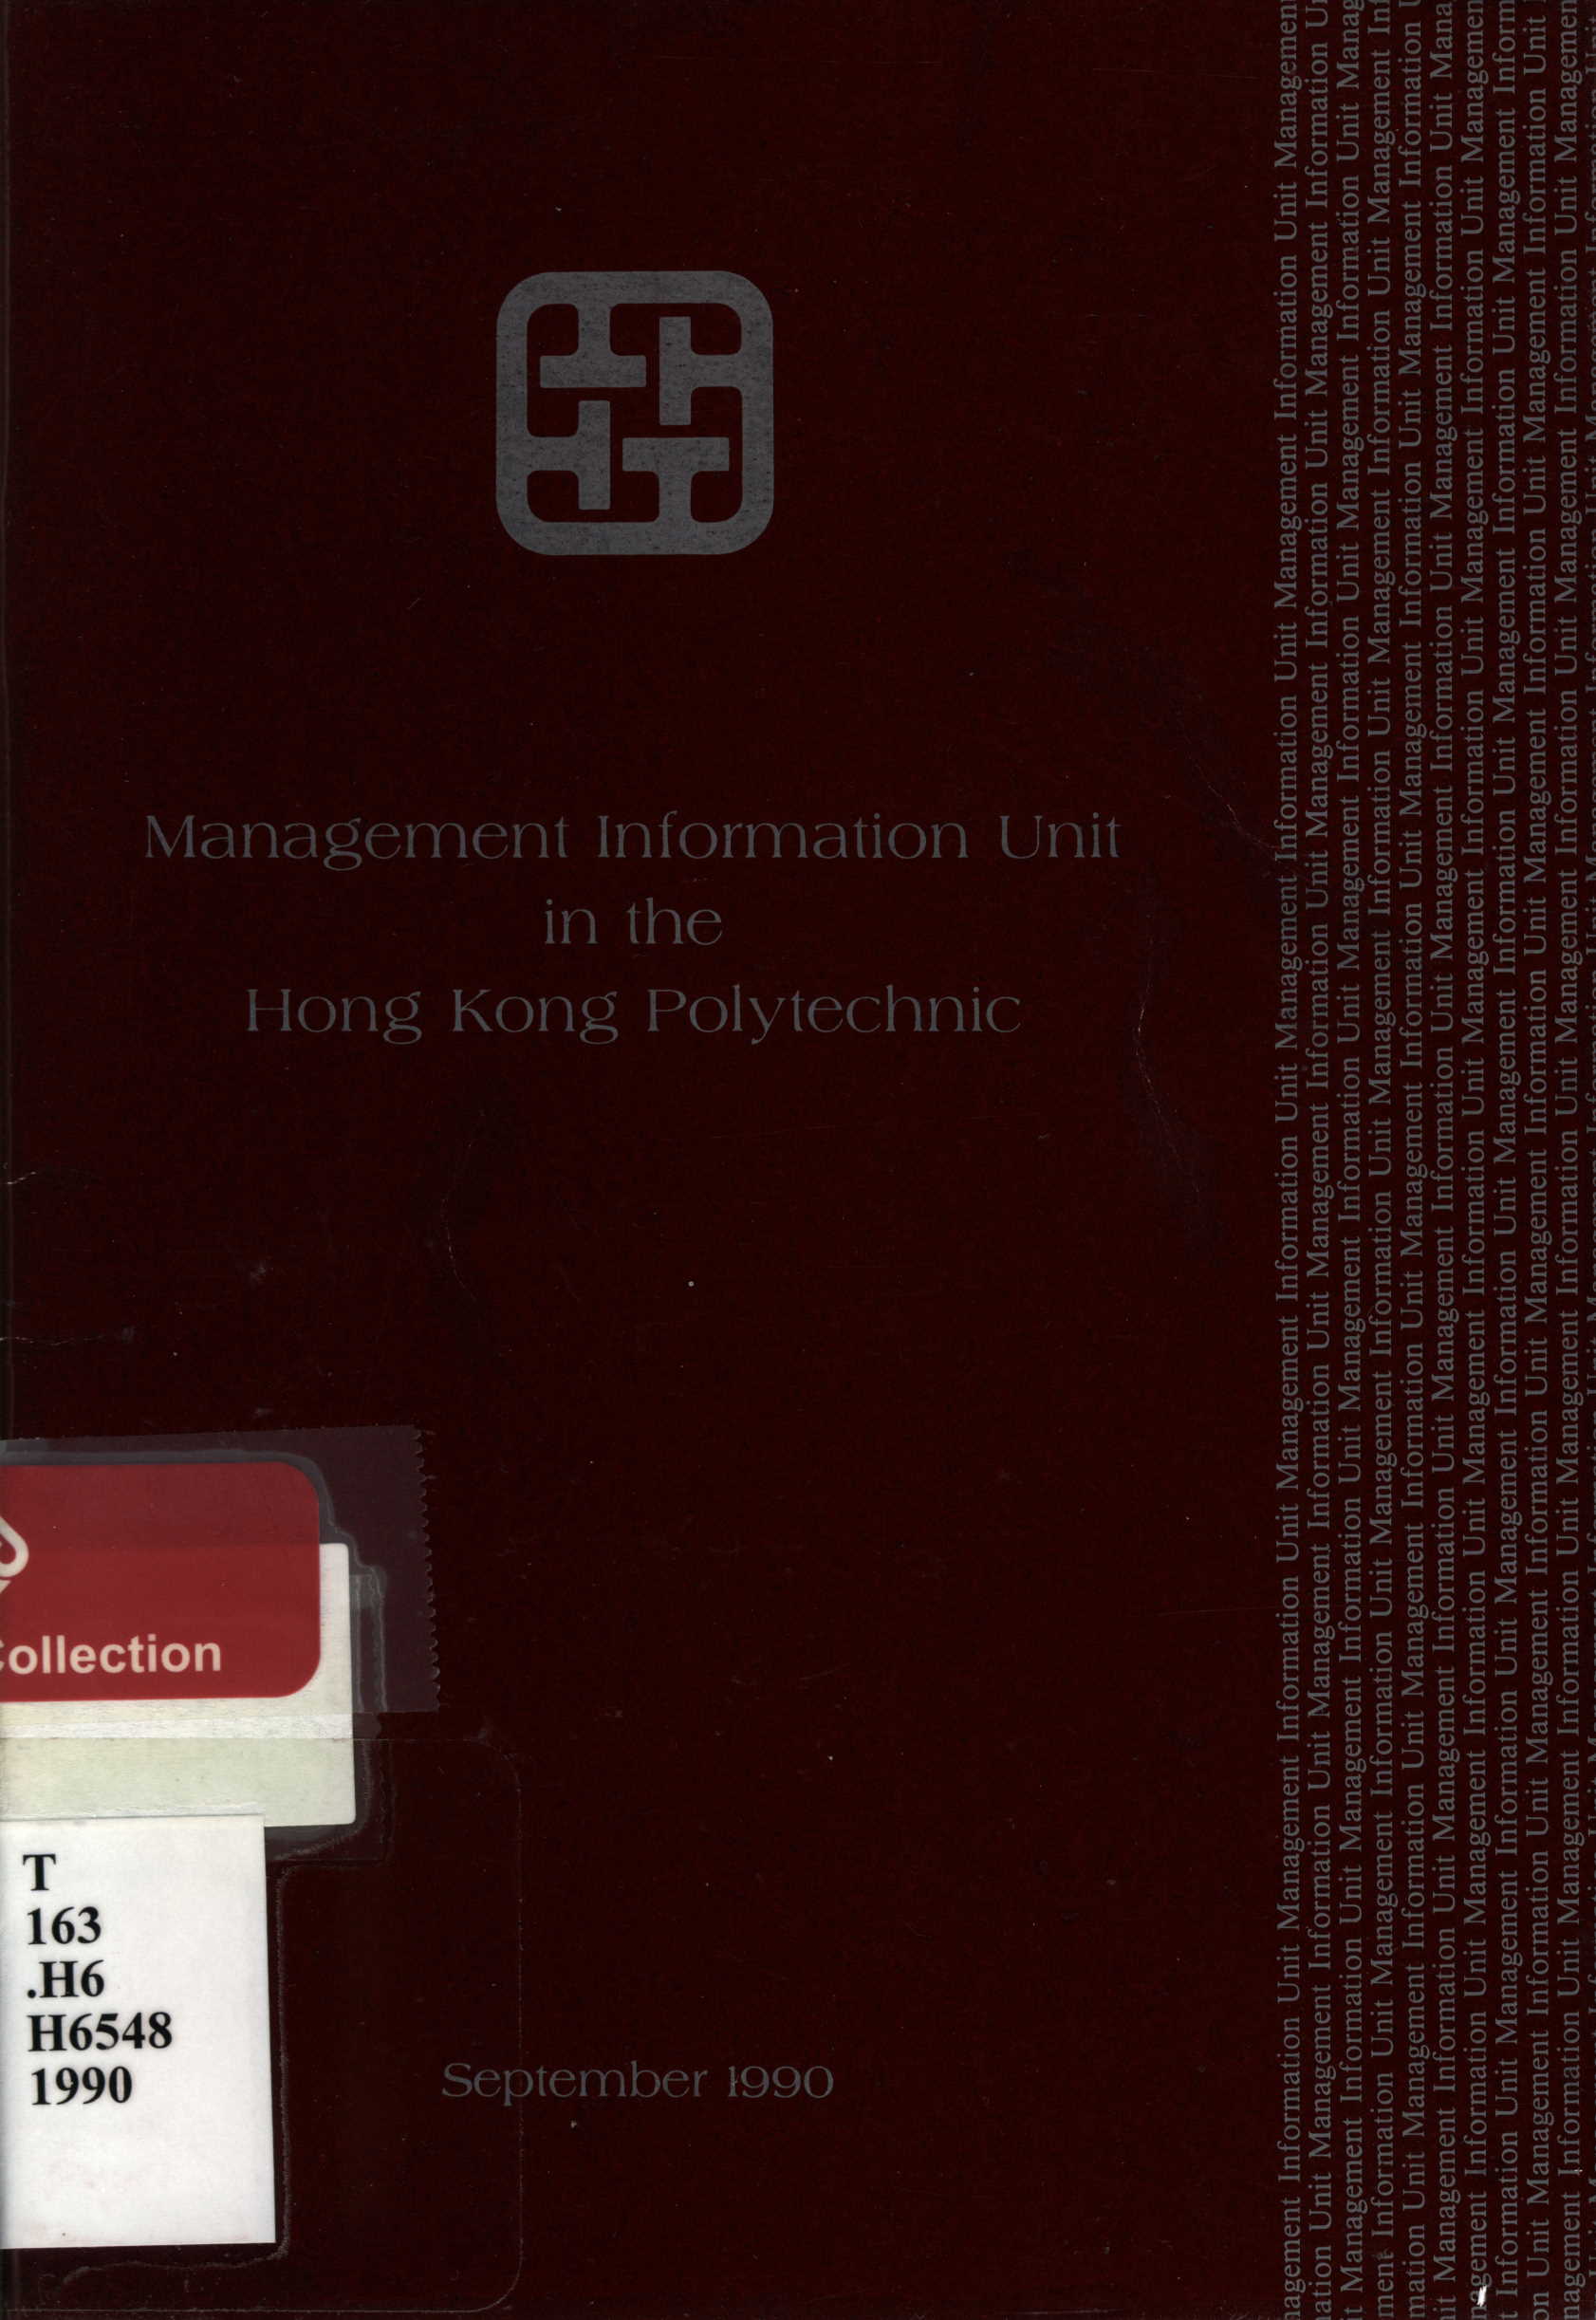 Management Information Unit in the Hong Kong Polytechnic 1990